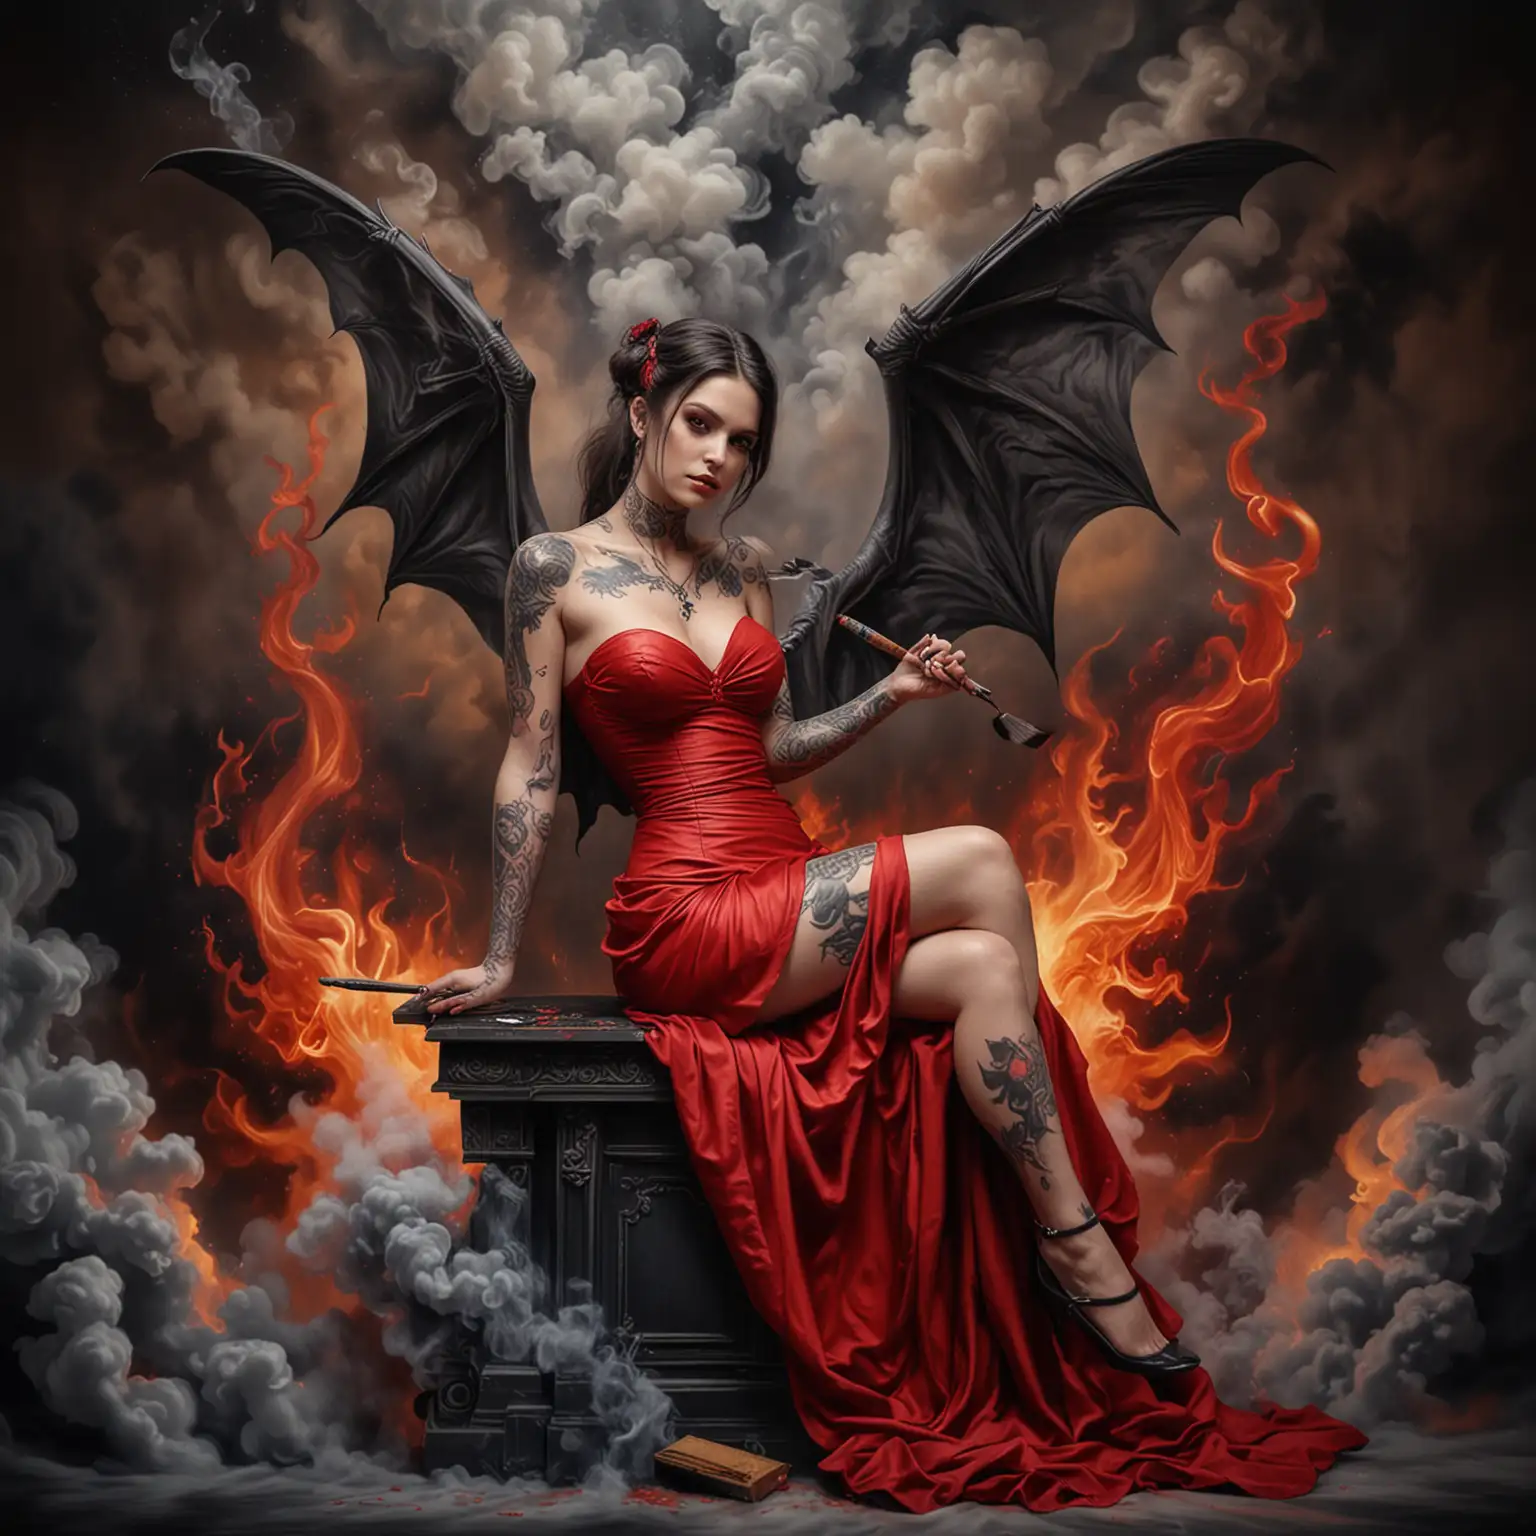 hyper realistic photography
a beautiful tattooed angel, She is a tattoo artist and wearing a red dress while she has black bat wings, seated on cloud of smoke and flames While hold painting brush in her hand and performing a painting on canvas
good rendering